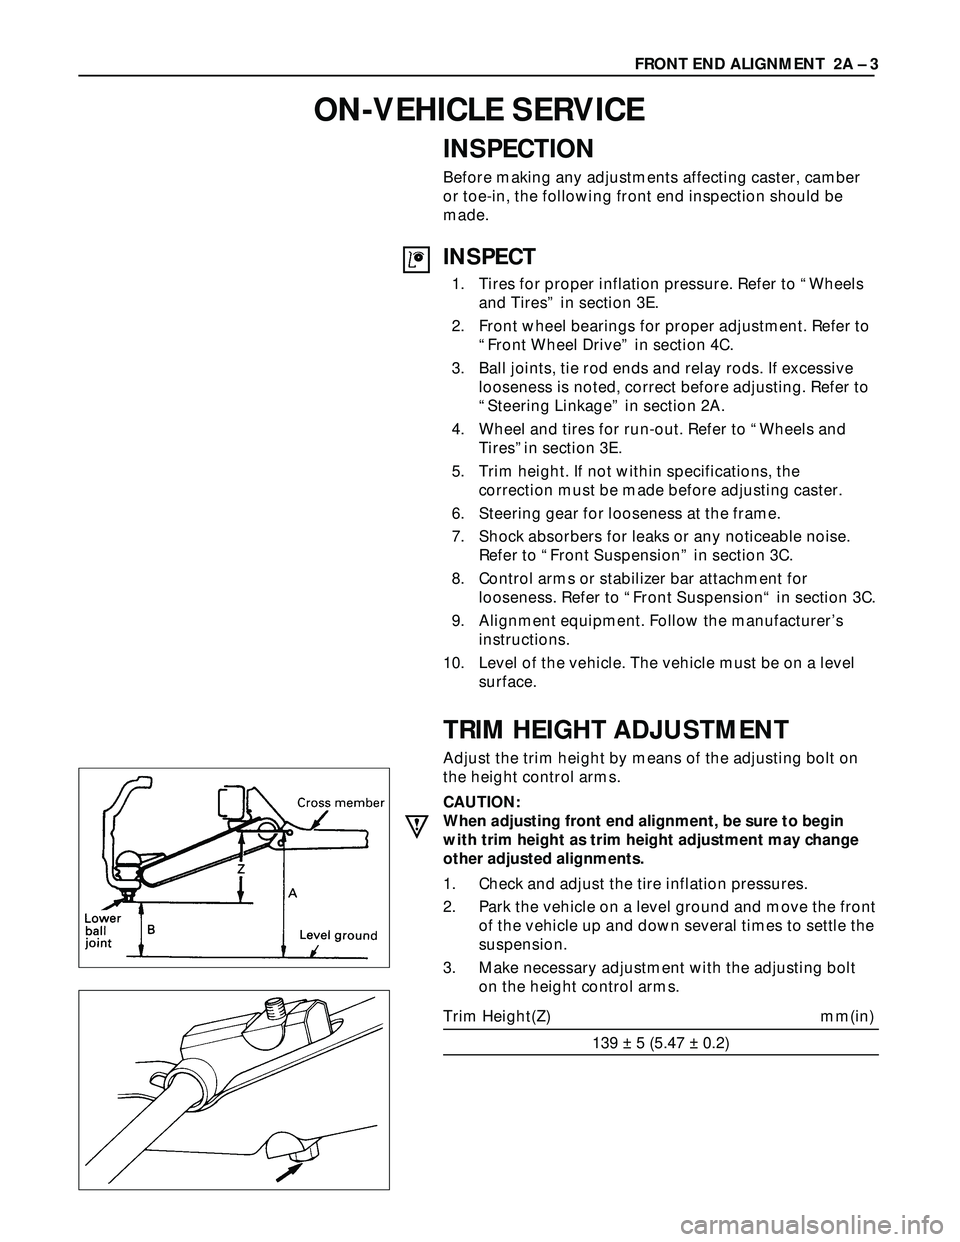 ISUZU TROOPER 1998  Service Repair Manual INSPECTION
Before making any adjustments affecting caster, camber
or toe-in, the following front end inspection should be
made.
INSPECT
1. Tires for proper inflation pressure. Refer to “Wheels
and T